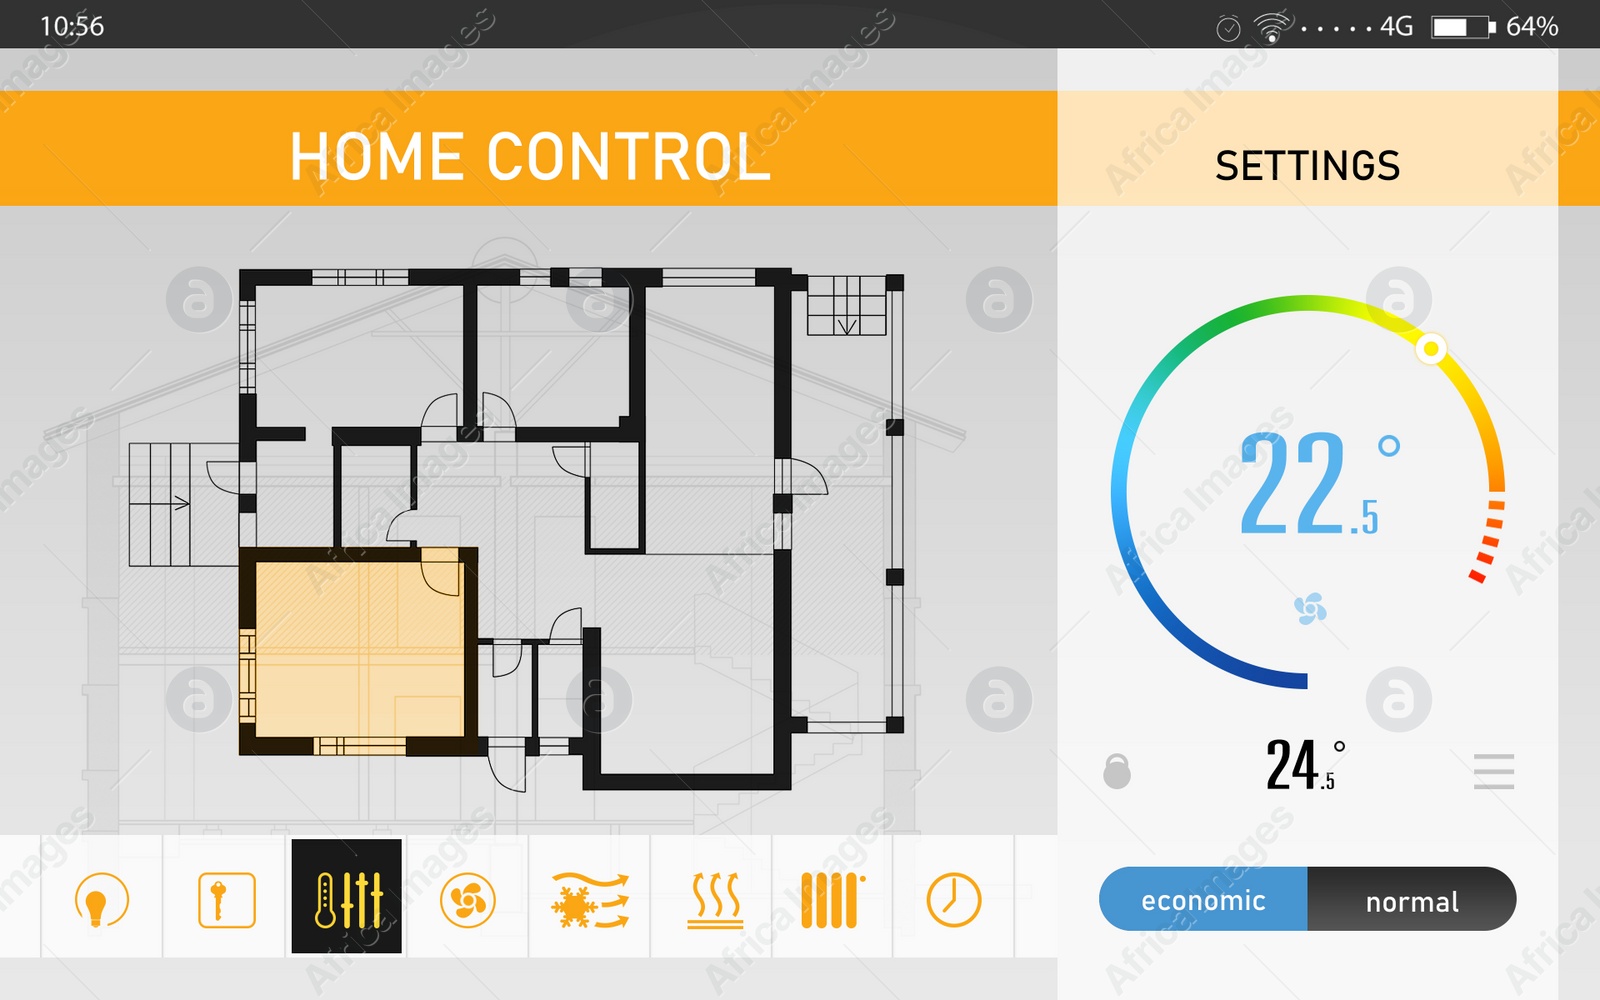 Illustration of Energy efficiency home control system. Application displaying house plan, indoor temperature and other settings